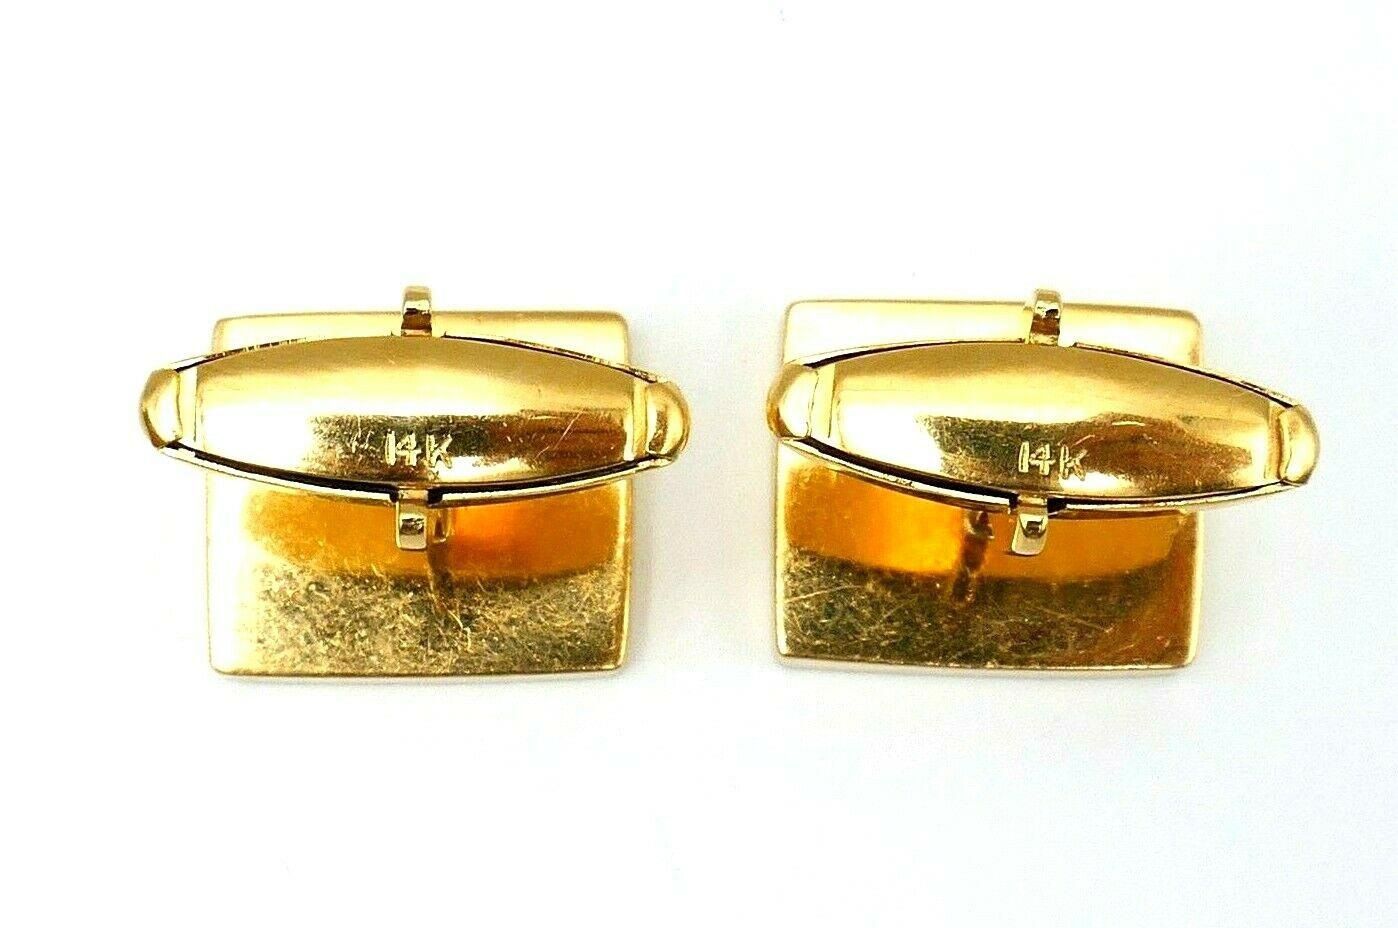 Vintage rectangular unisex cufflinks made of 14k yellow gold features polished coral. Stamped with a hallmark for 14k gold.
Measurements: the front part is 11/16